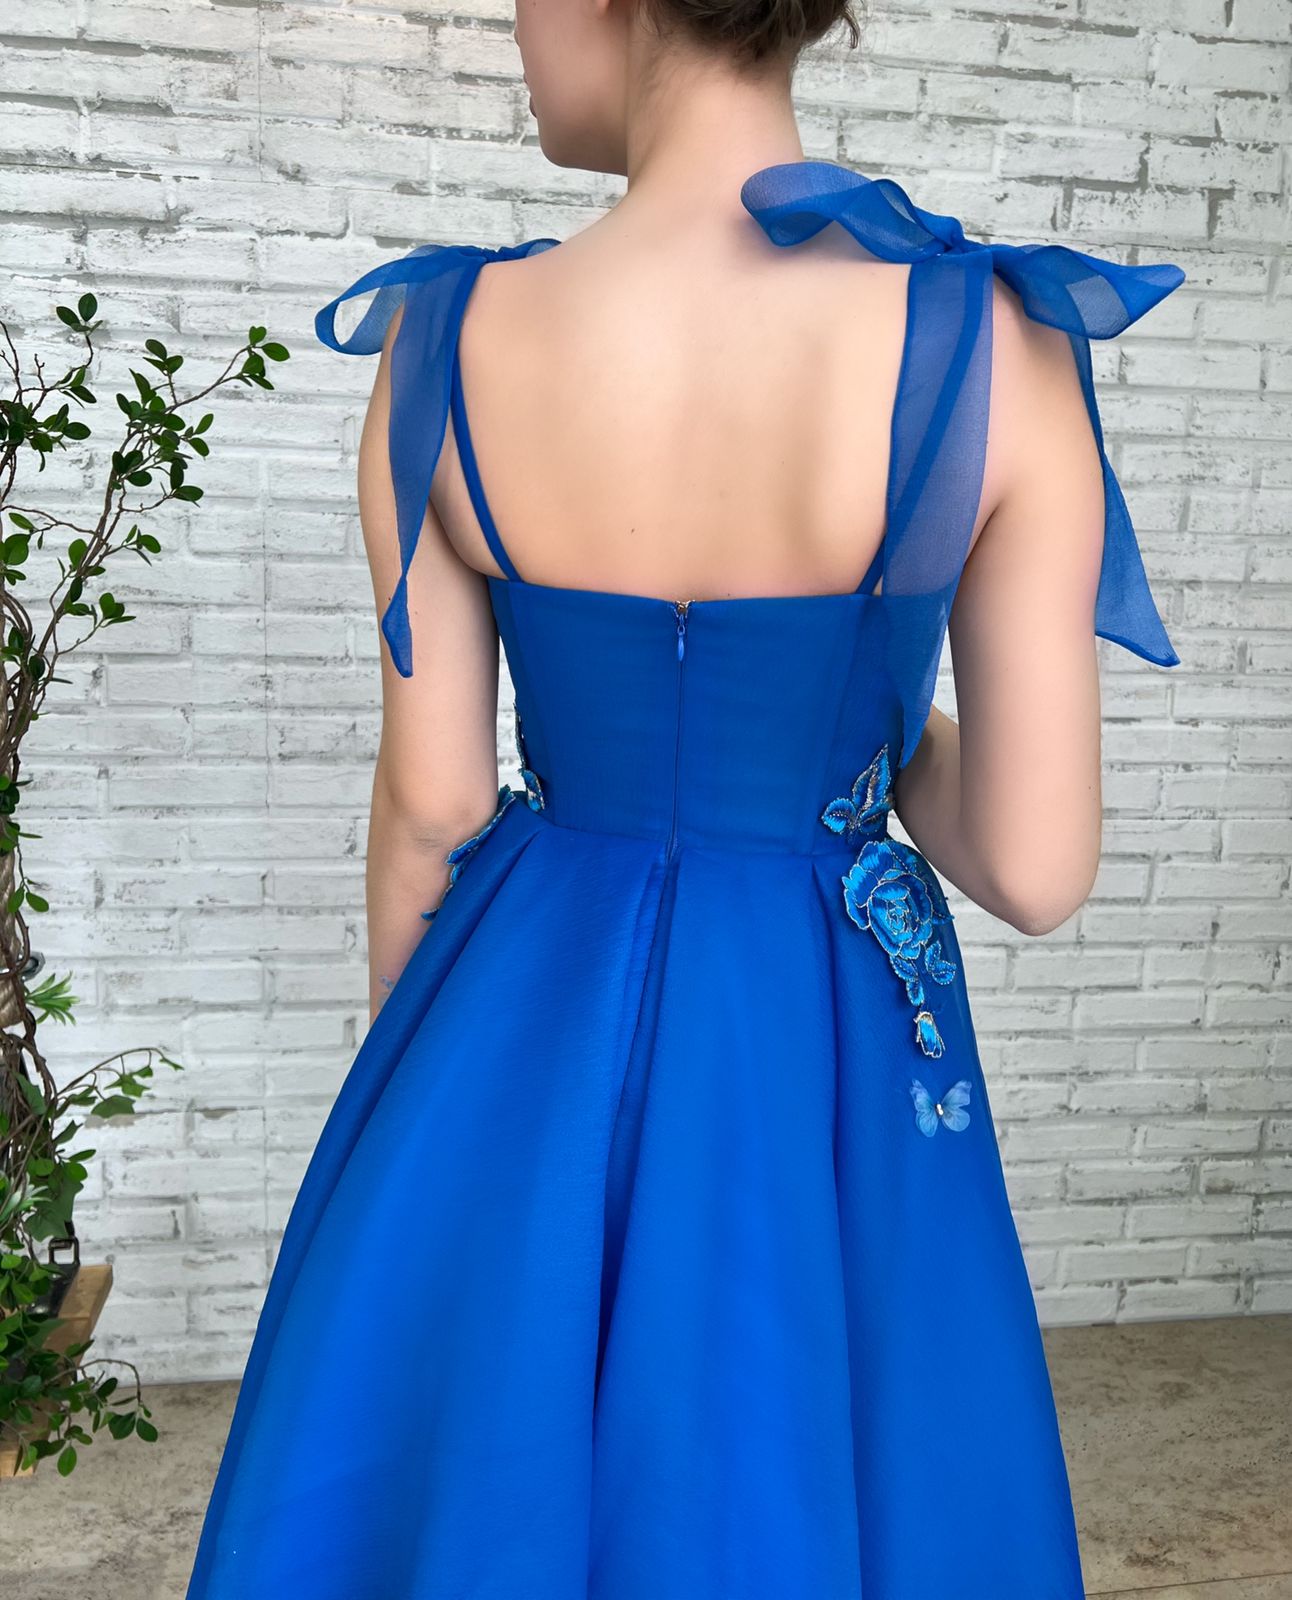 Blue midi dress with spaghetti straps, embroidery and butterflies